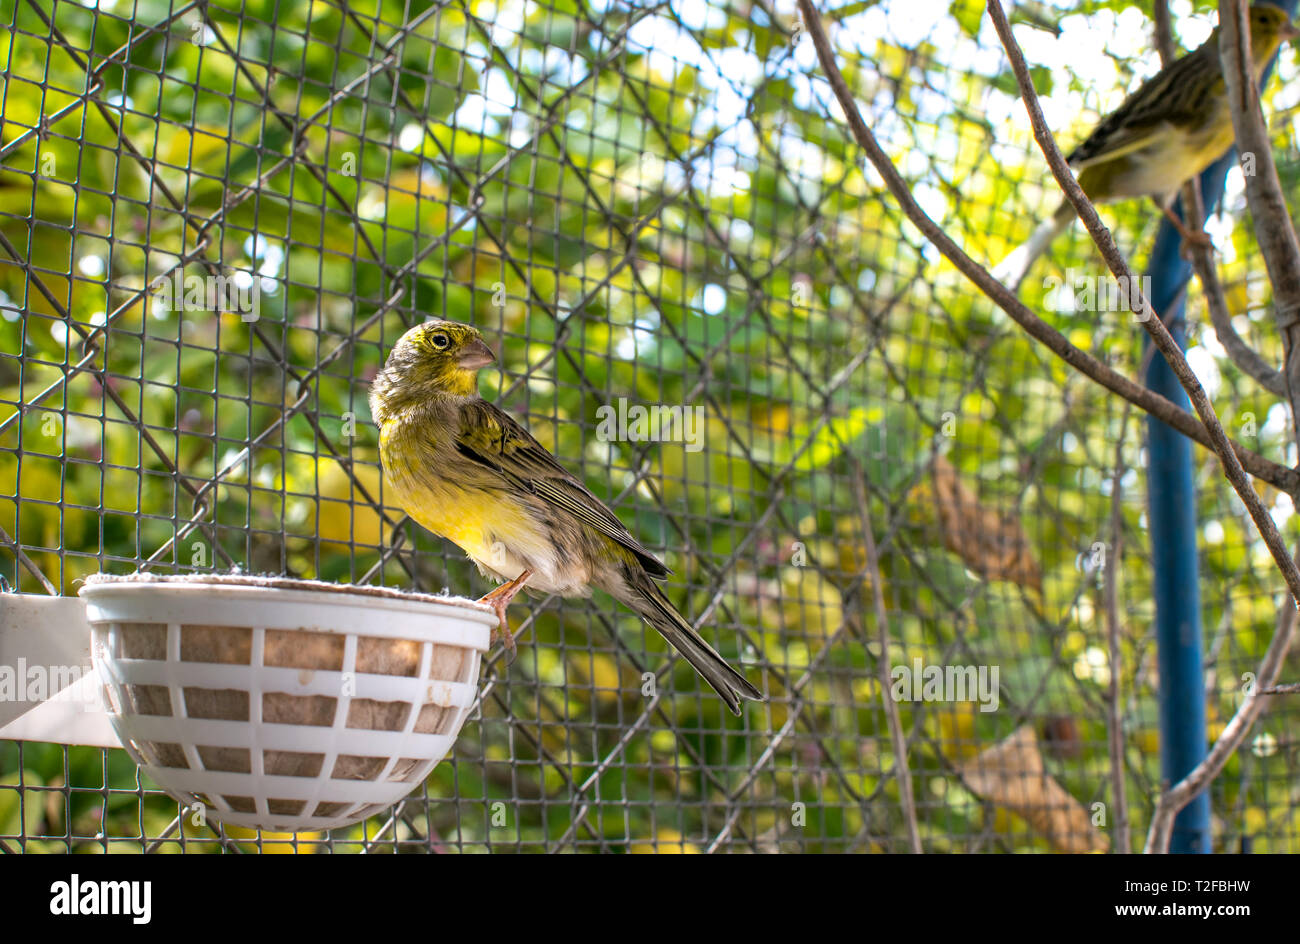 The Atlantic canary bird (Serinus canaria), canaries, island canary,  birds pet perched on a wooden stick against lemon trees inside a cage in Spain, 2019. Stock Photo